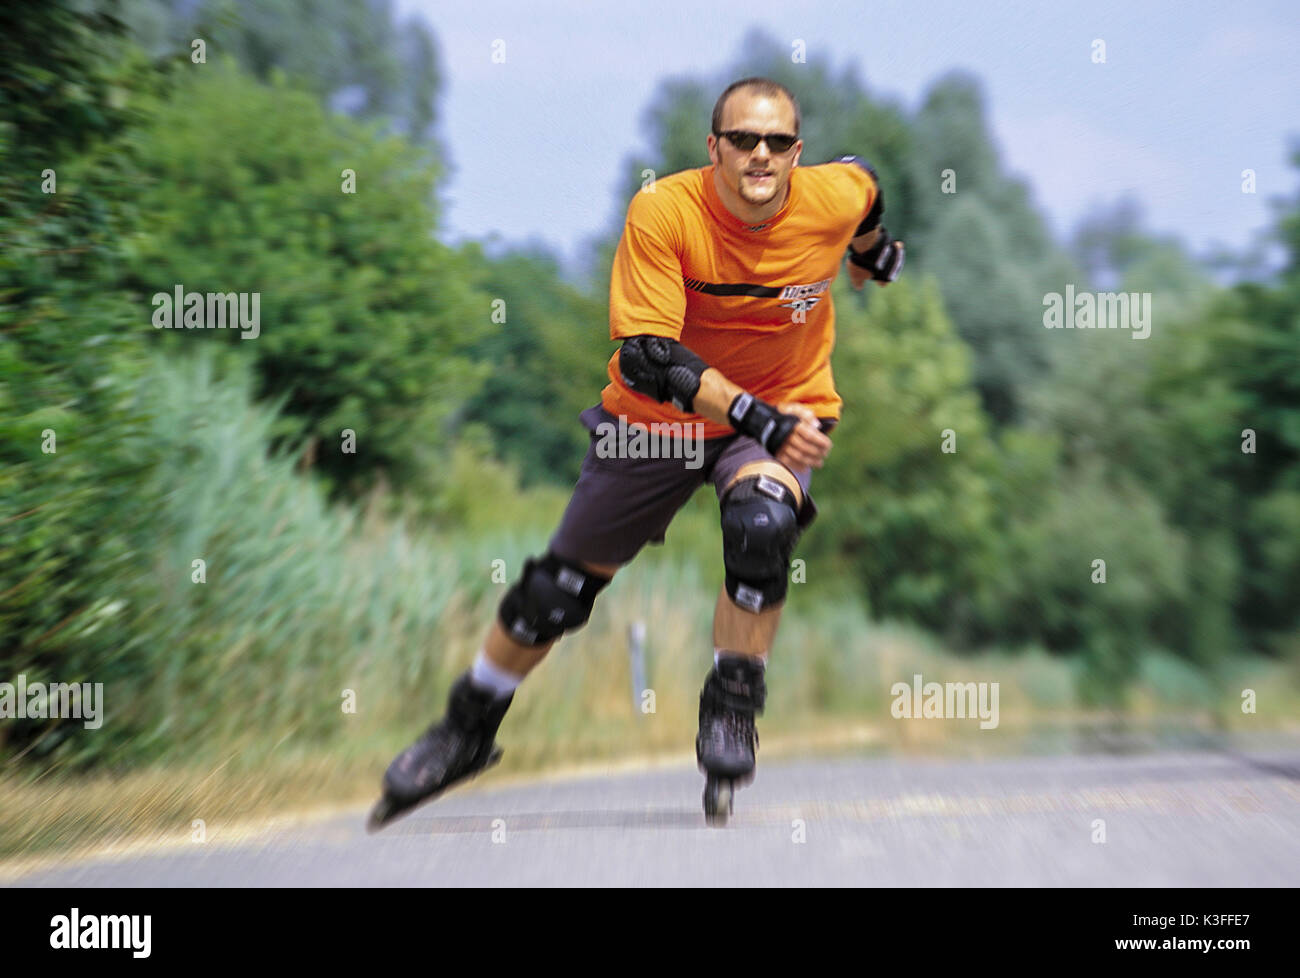 Inline Skating Man High Resolution Stock Photography and Images - Alamy